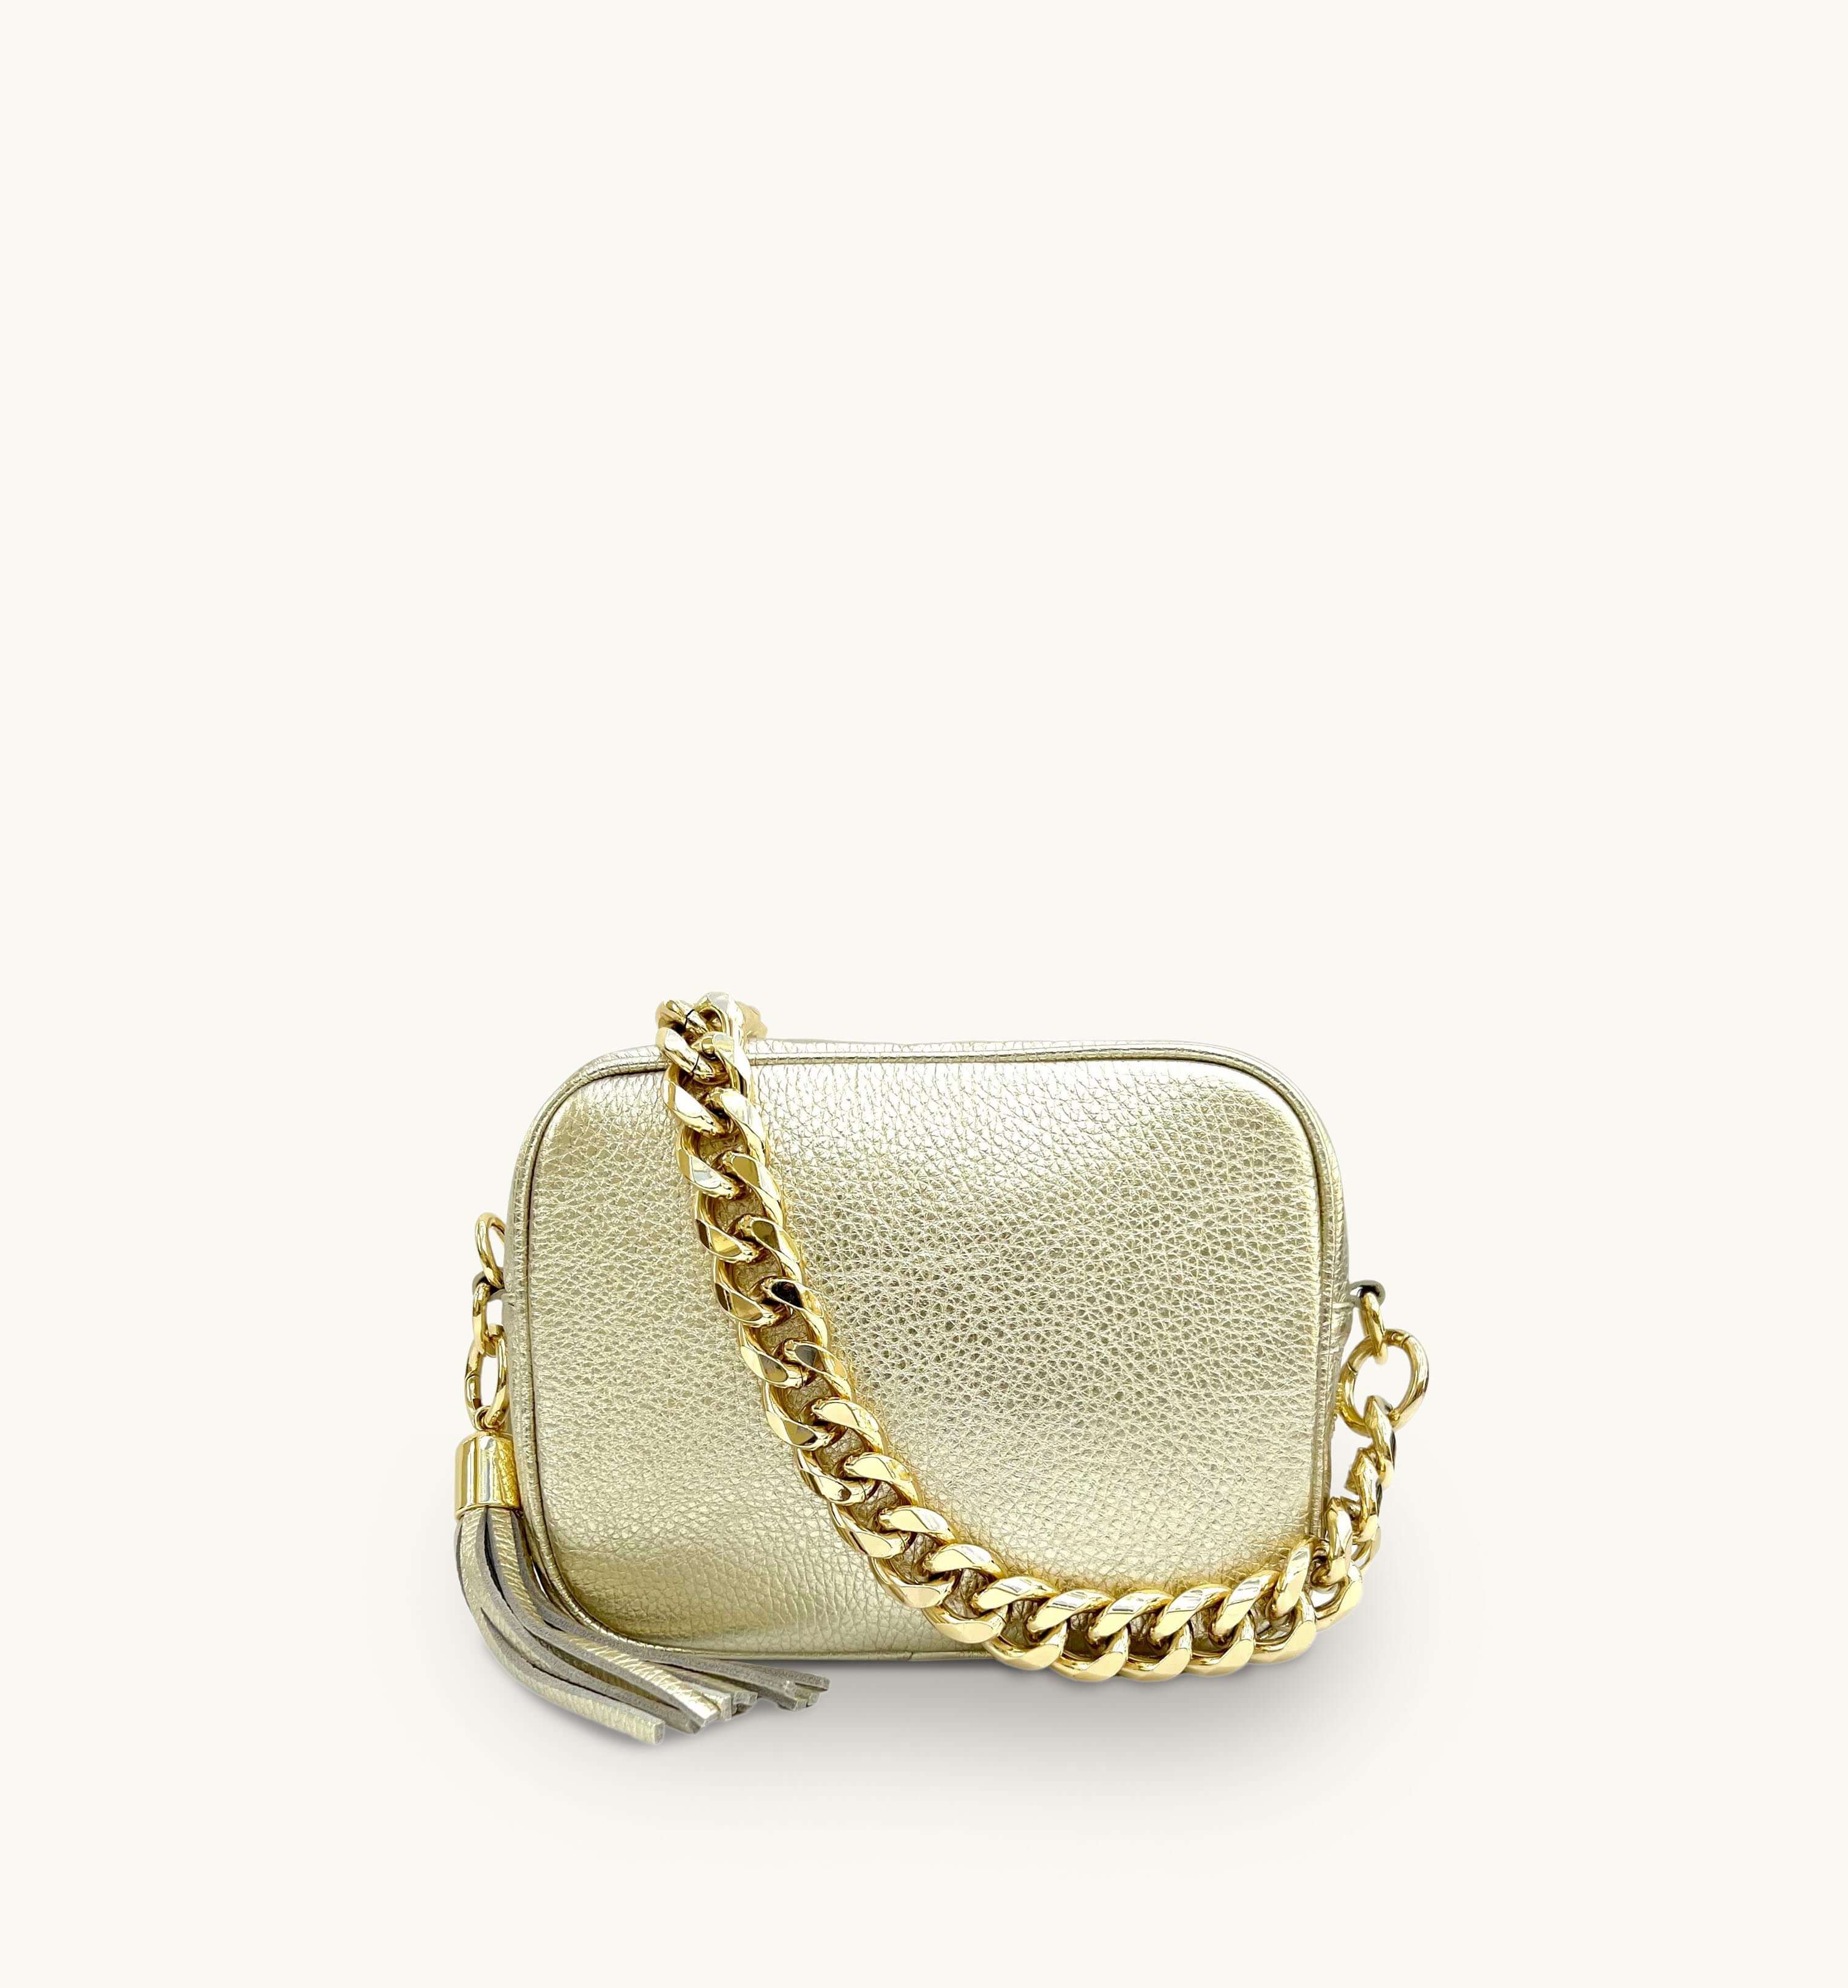 The Bloxsome Black Leather Crossbody Bag & Gold Chain Strap – Apatchy London